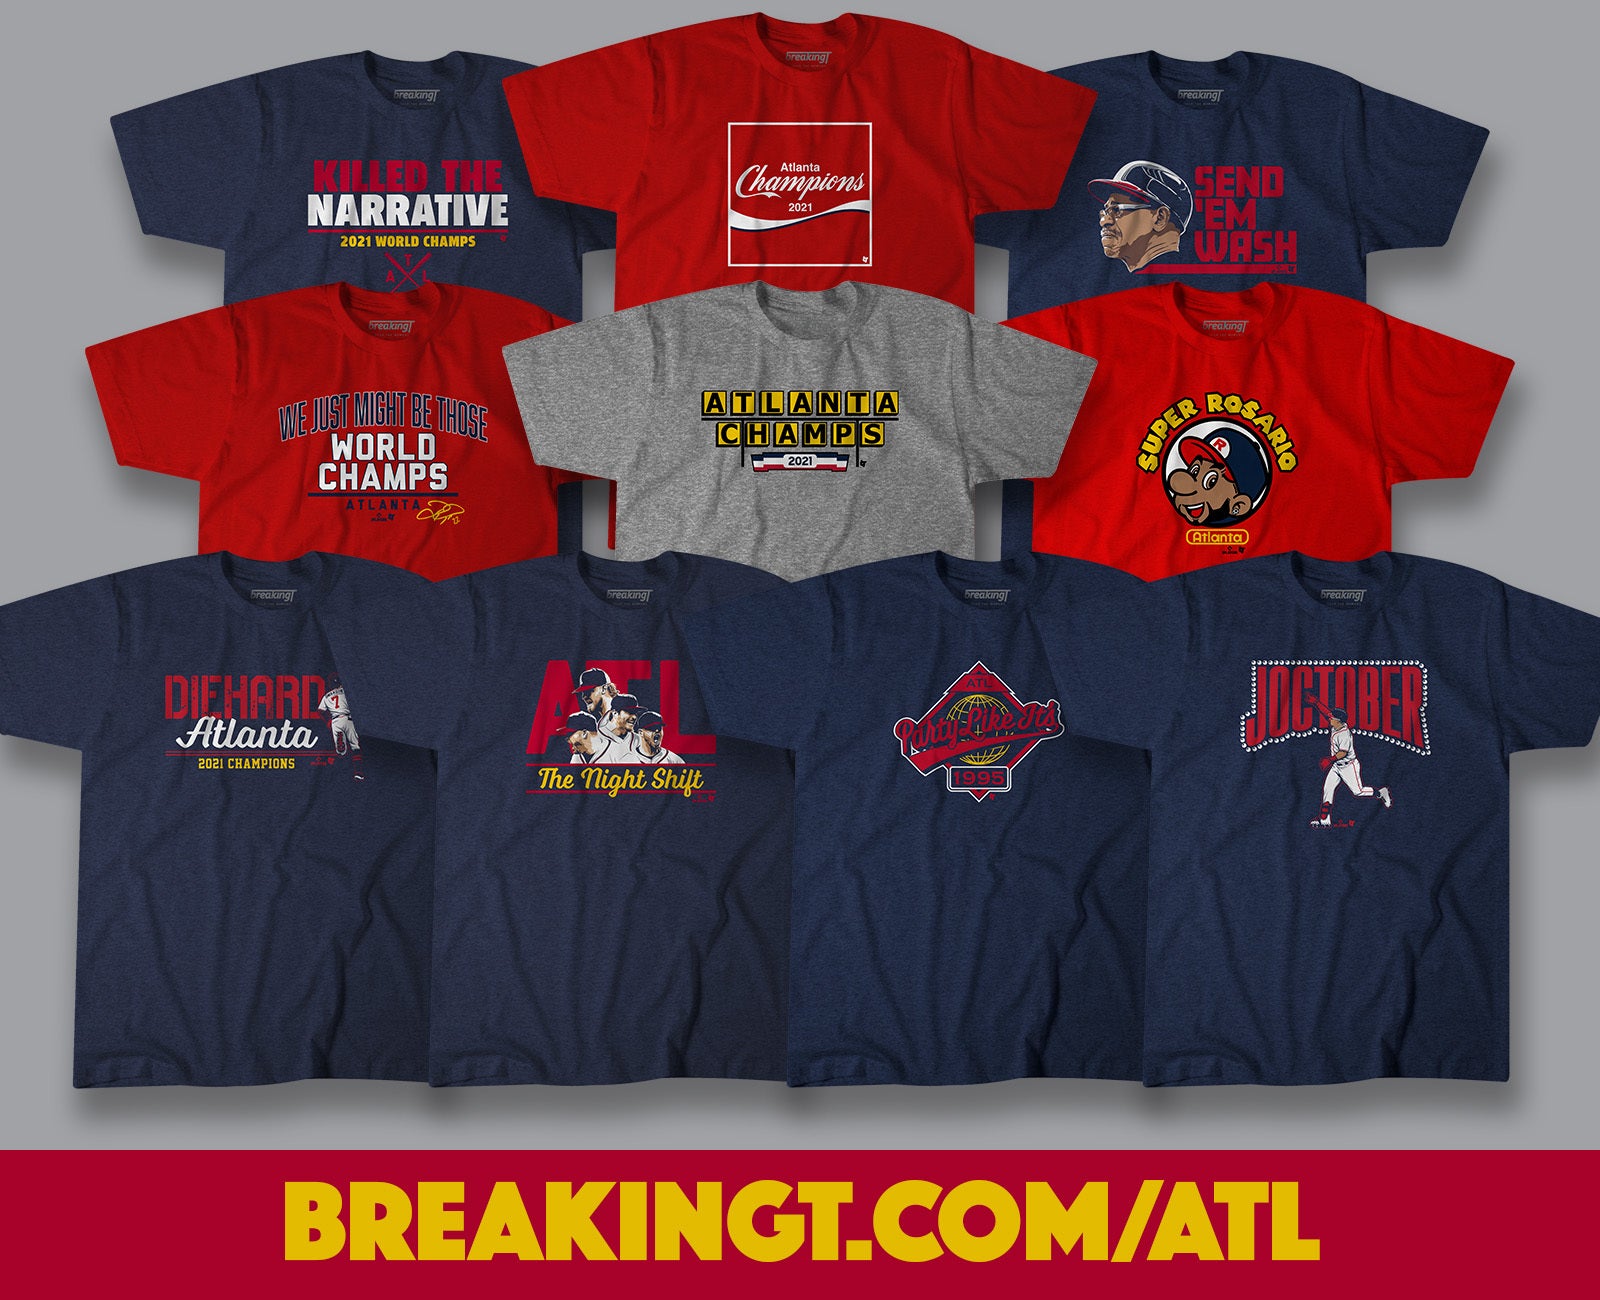 World Series ready: Sports stores have Braves championship shirts